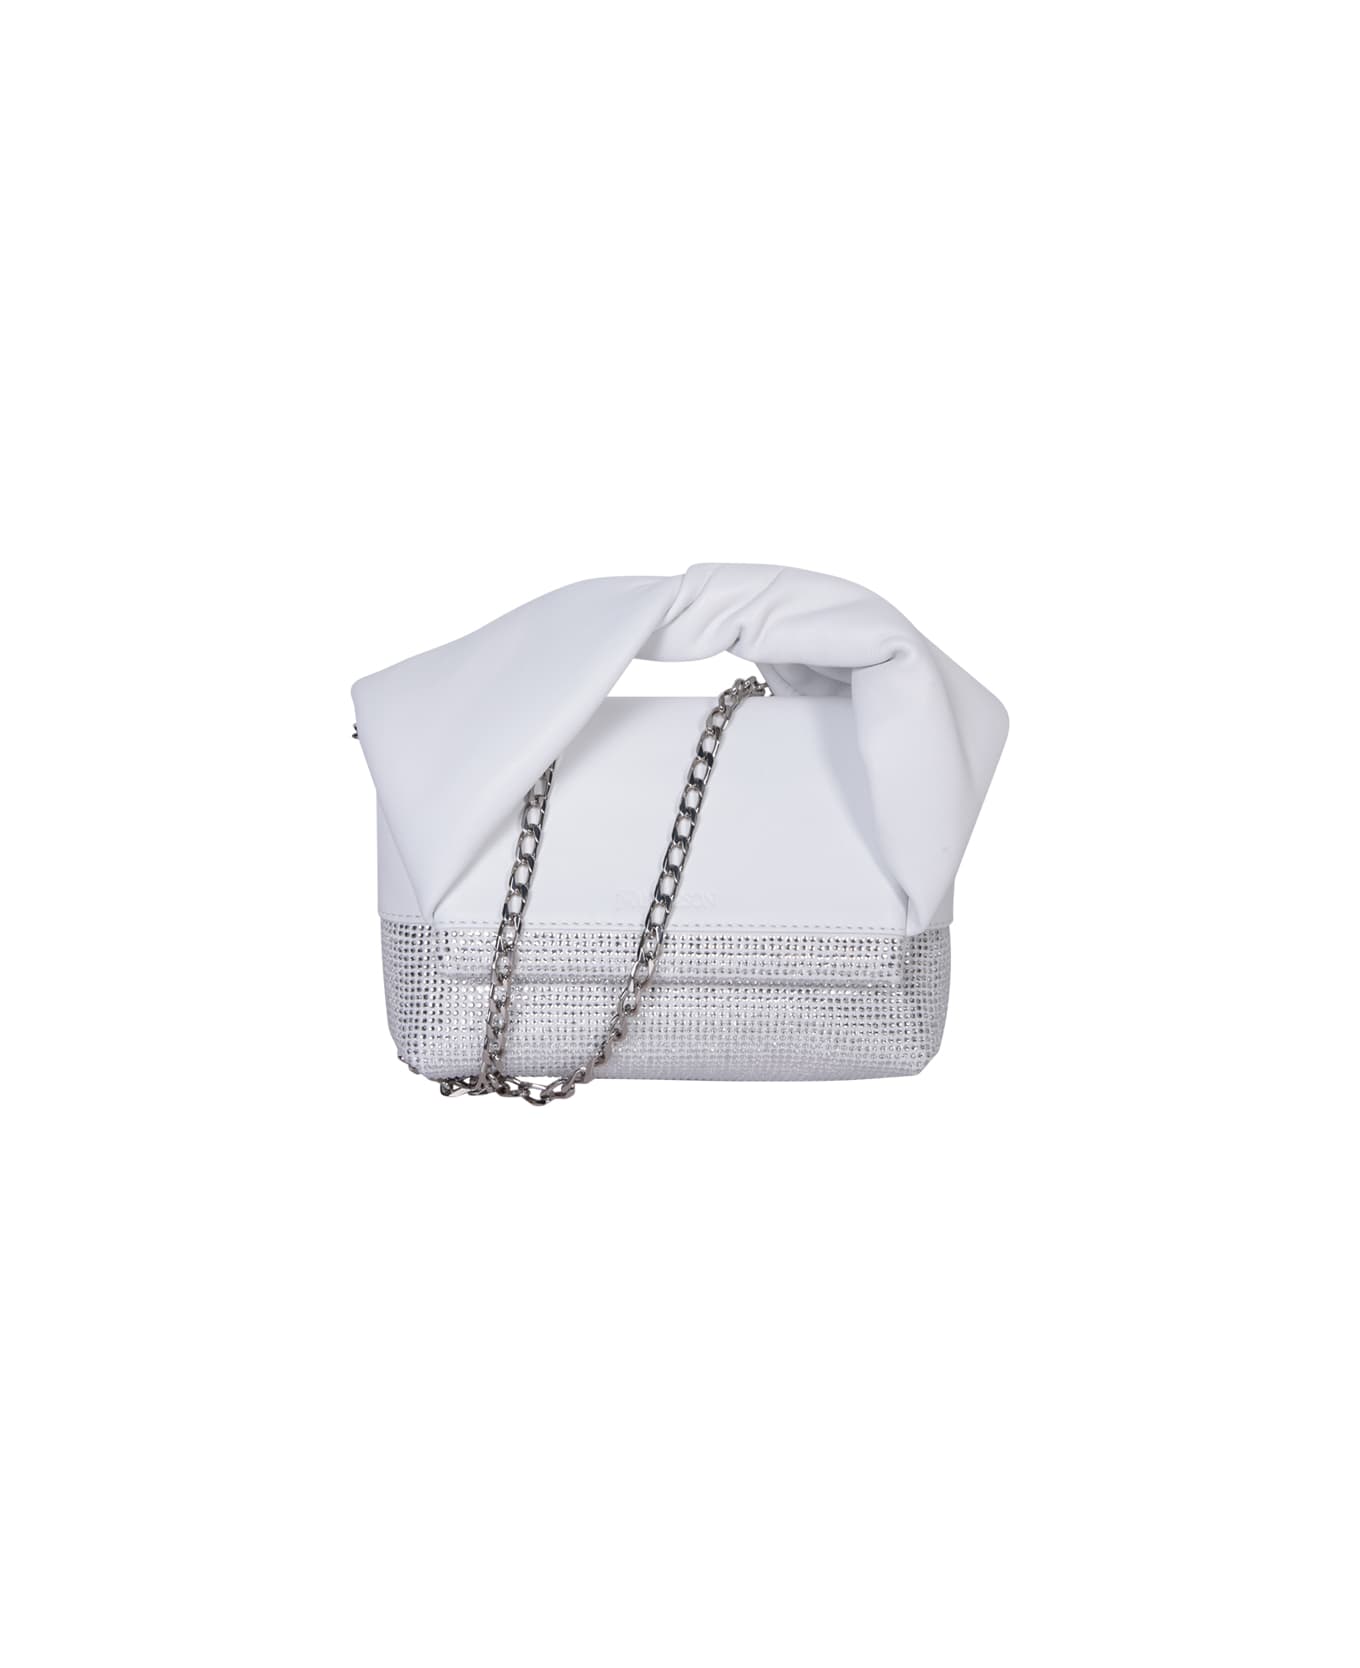 J.W. Anderson Small Twister Bag - WHITE